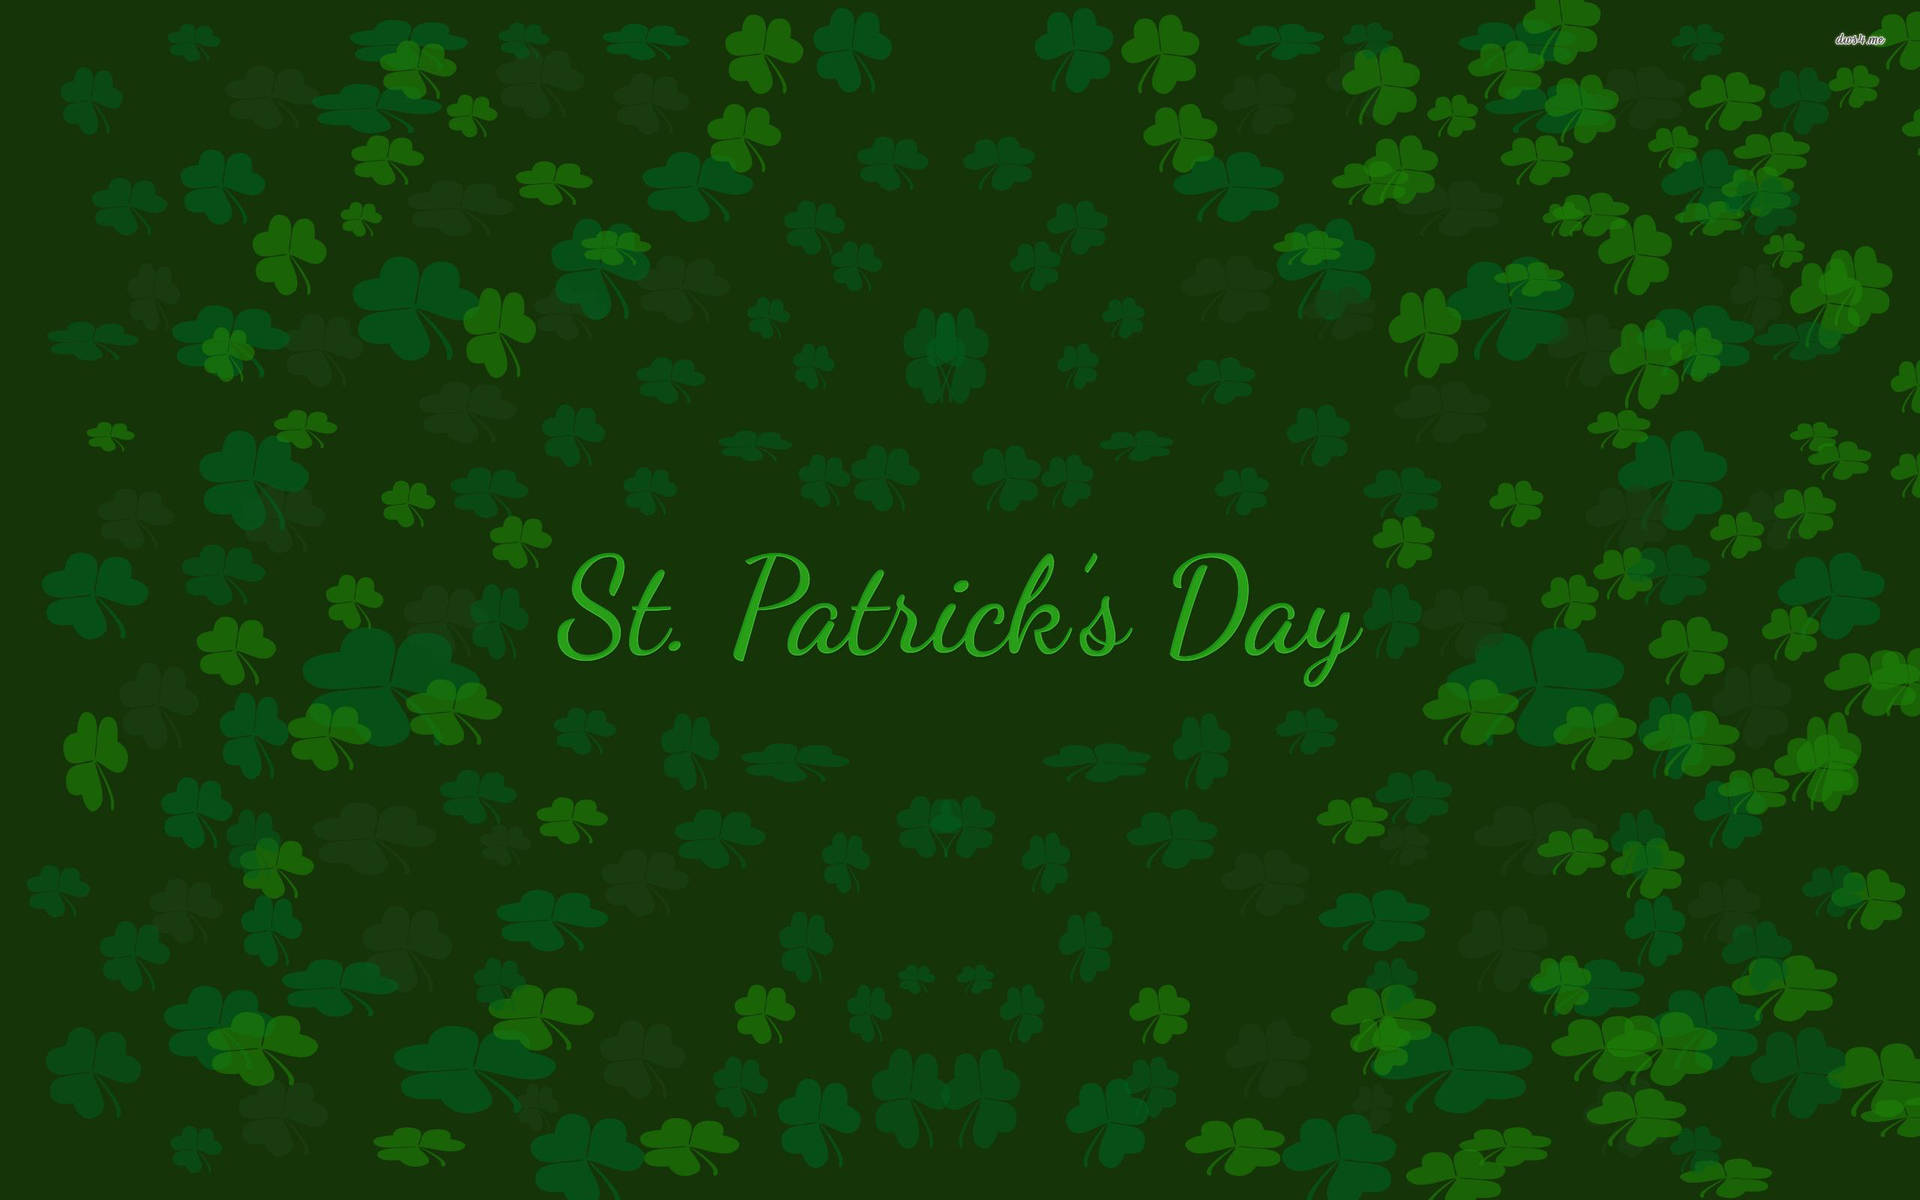 Saint Patrick’s Day Over Clover Green Background Wallpaper